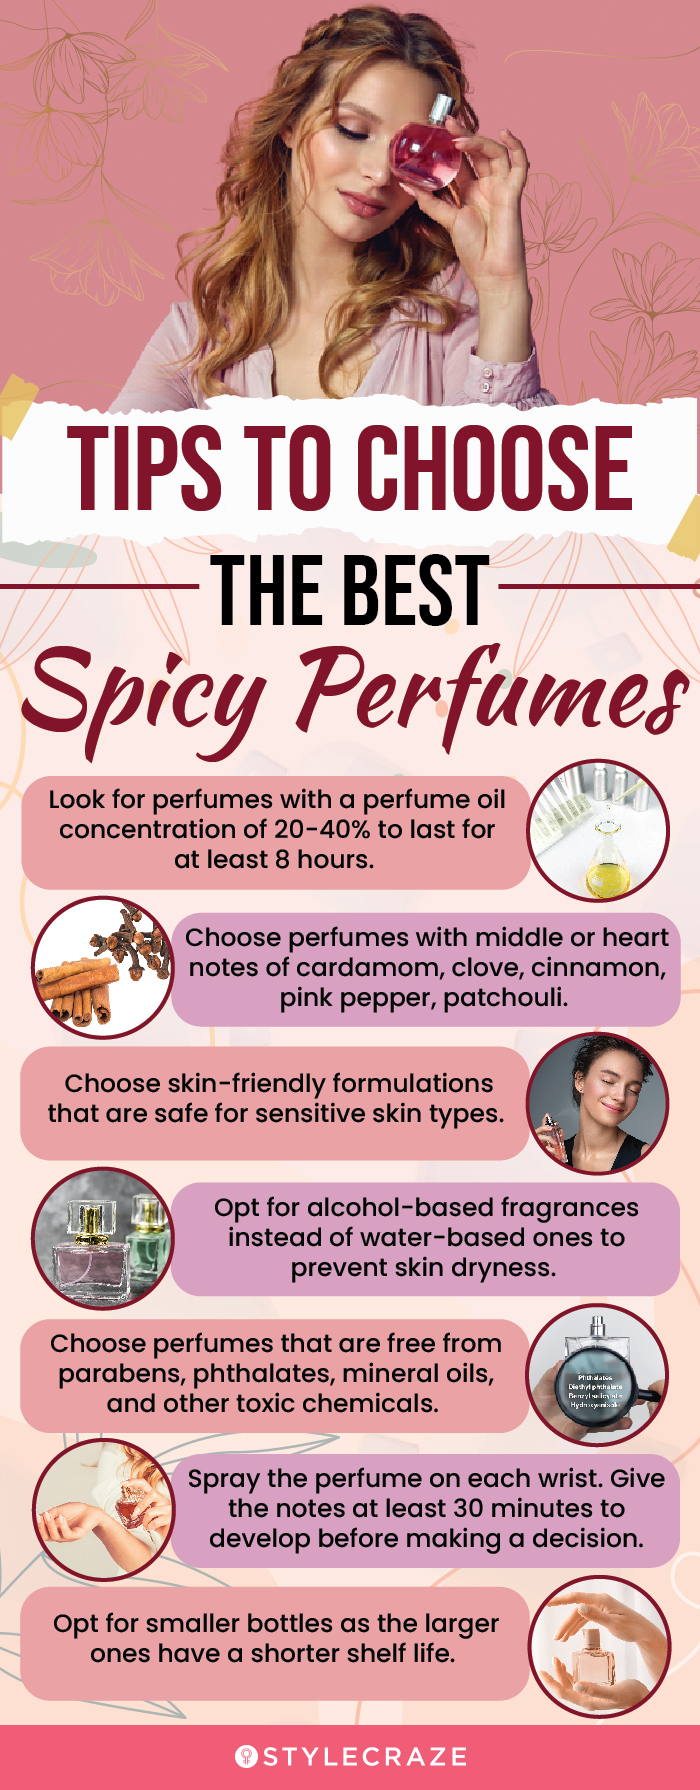 Tips To Choose The Best Spicy Perfumes [infographic]